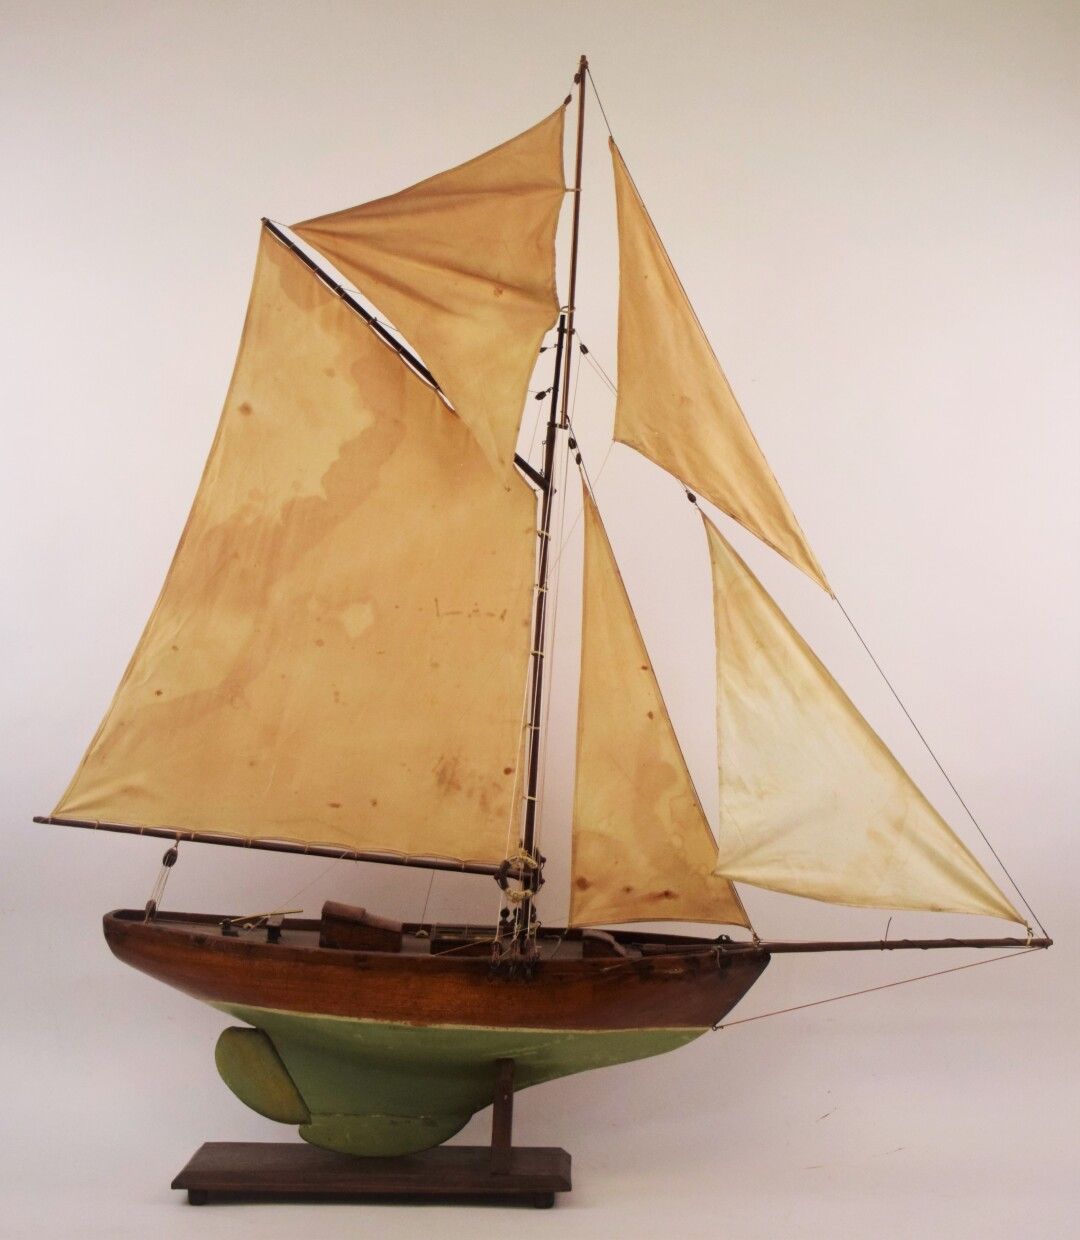 Null Large wooden sailing model with rigging

Height: -Length: